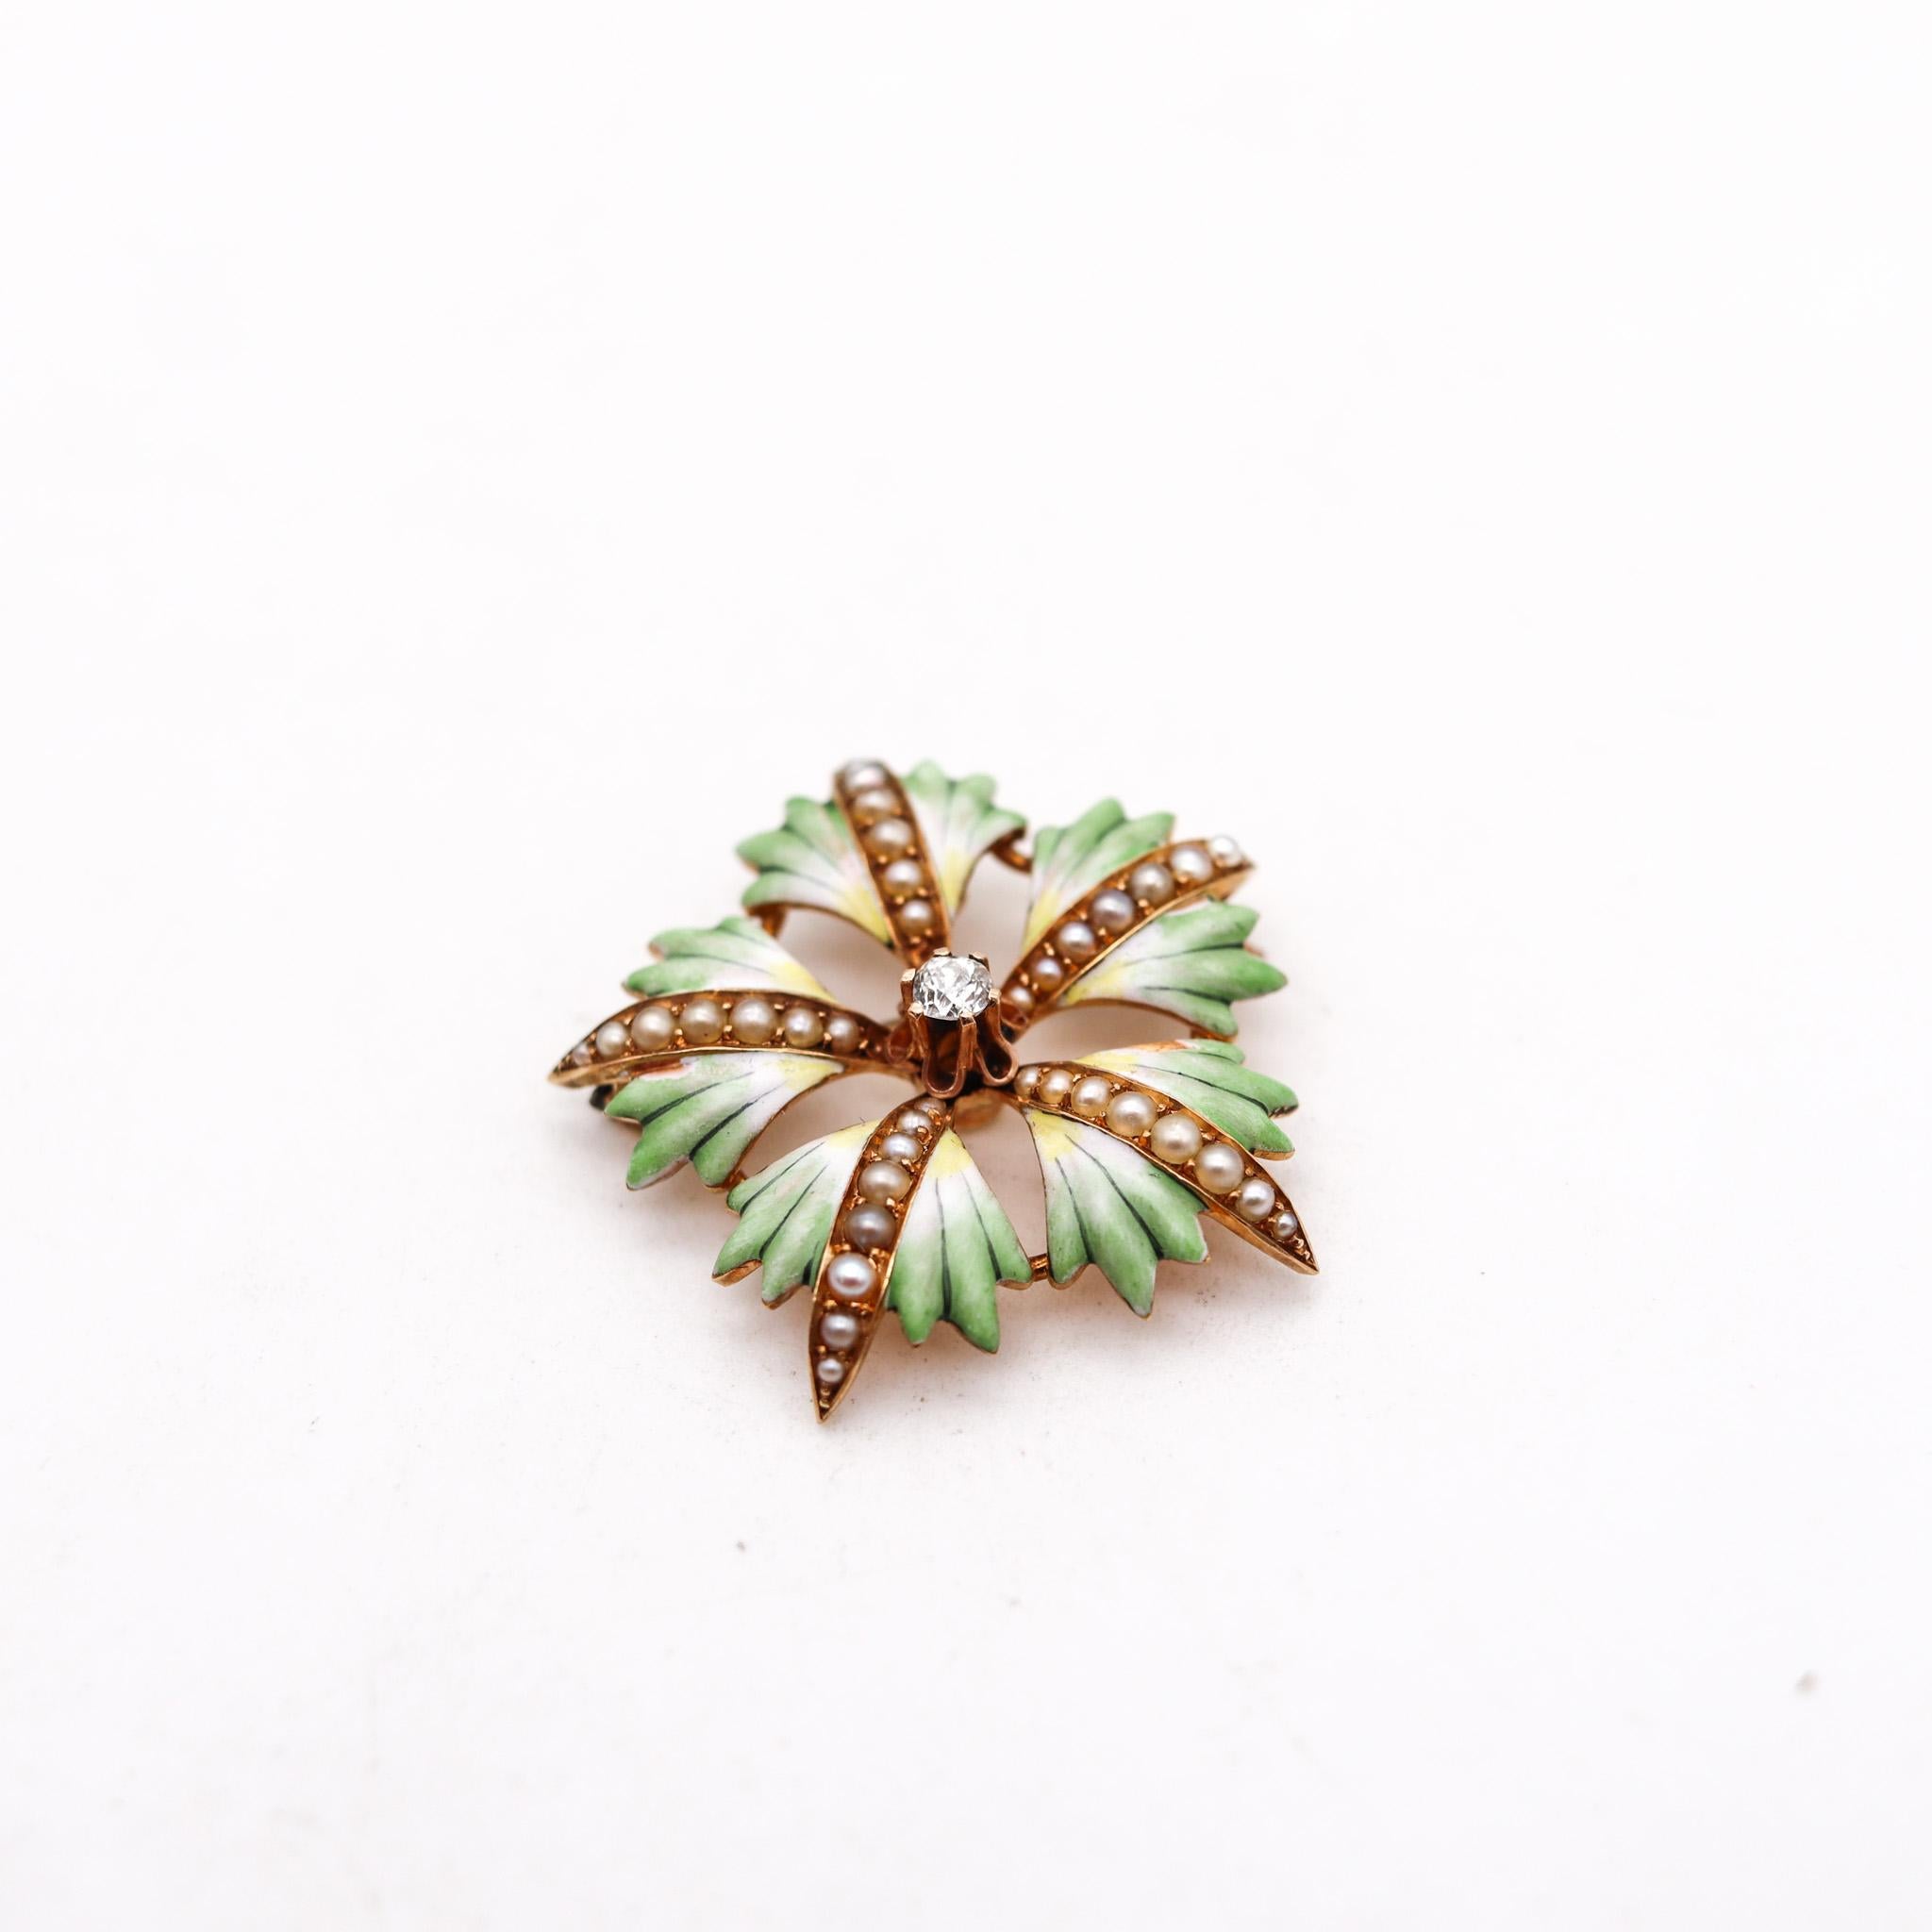 Edwardian enameled flower convertible brooch.

An extremely beautiful and rare piece, created in America during the Edwardian and the Art Nouveau periods, back in the 1900-1910. This outstanding convertible pendant-brooch has been carefully crafted